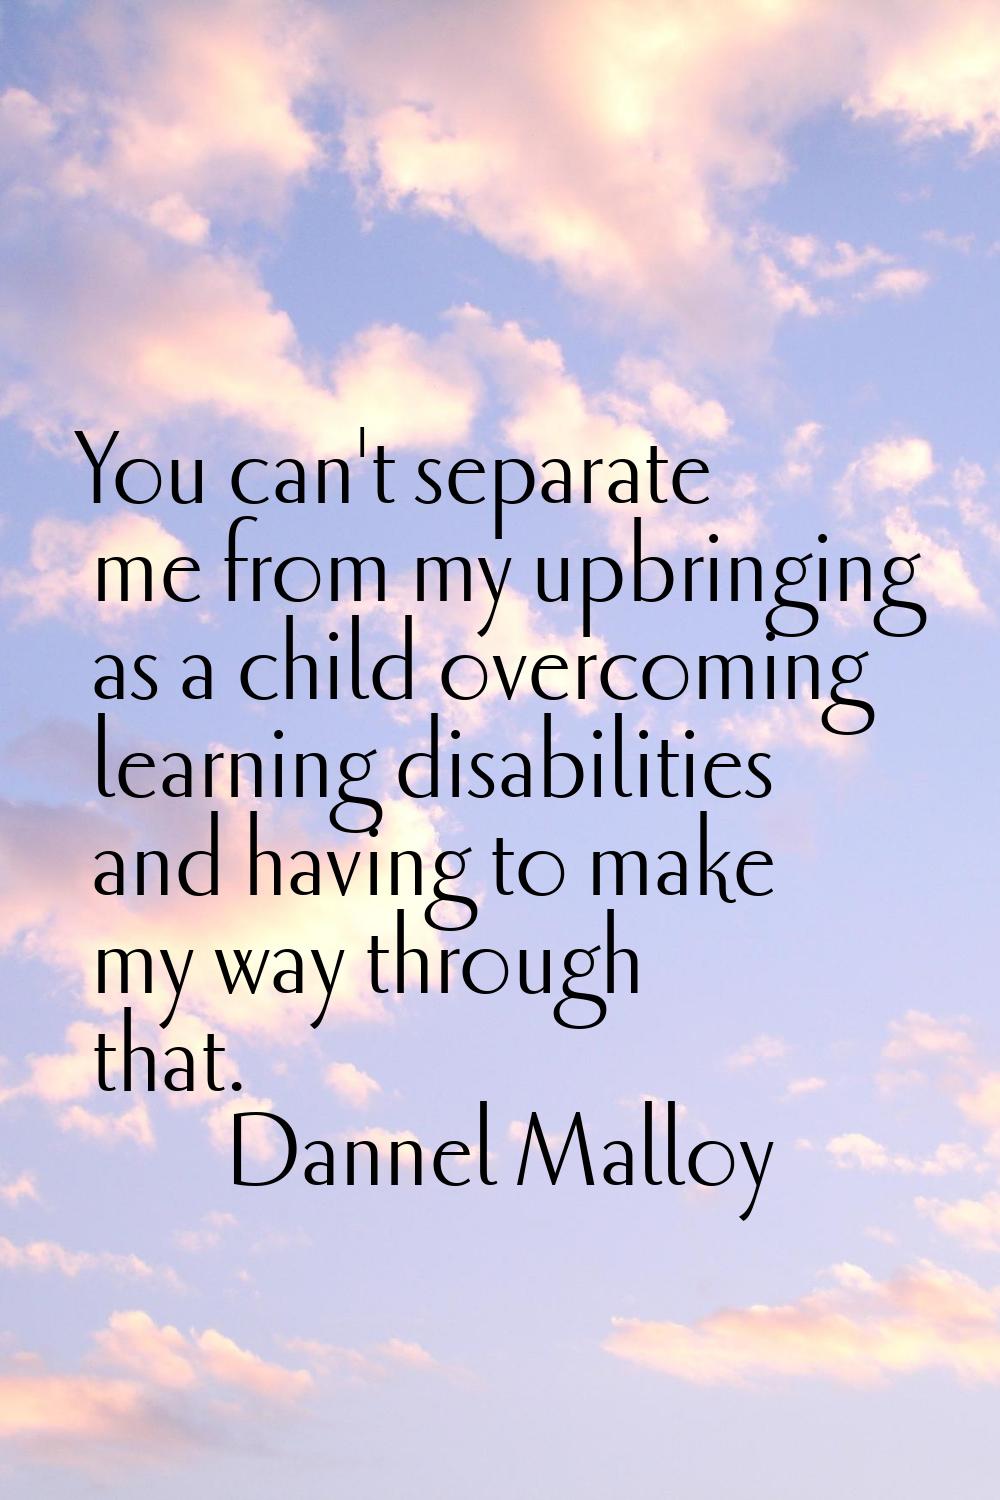 You can't separate me from my upbringing as a child overcoming learning disabilities and having to 